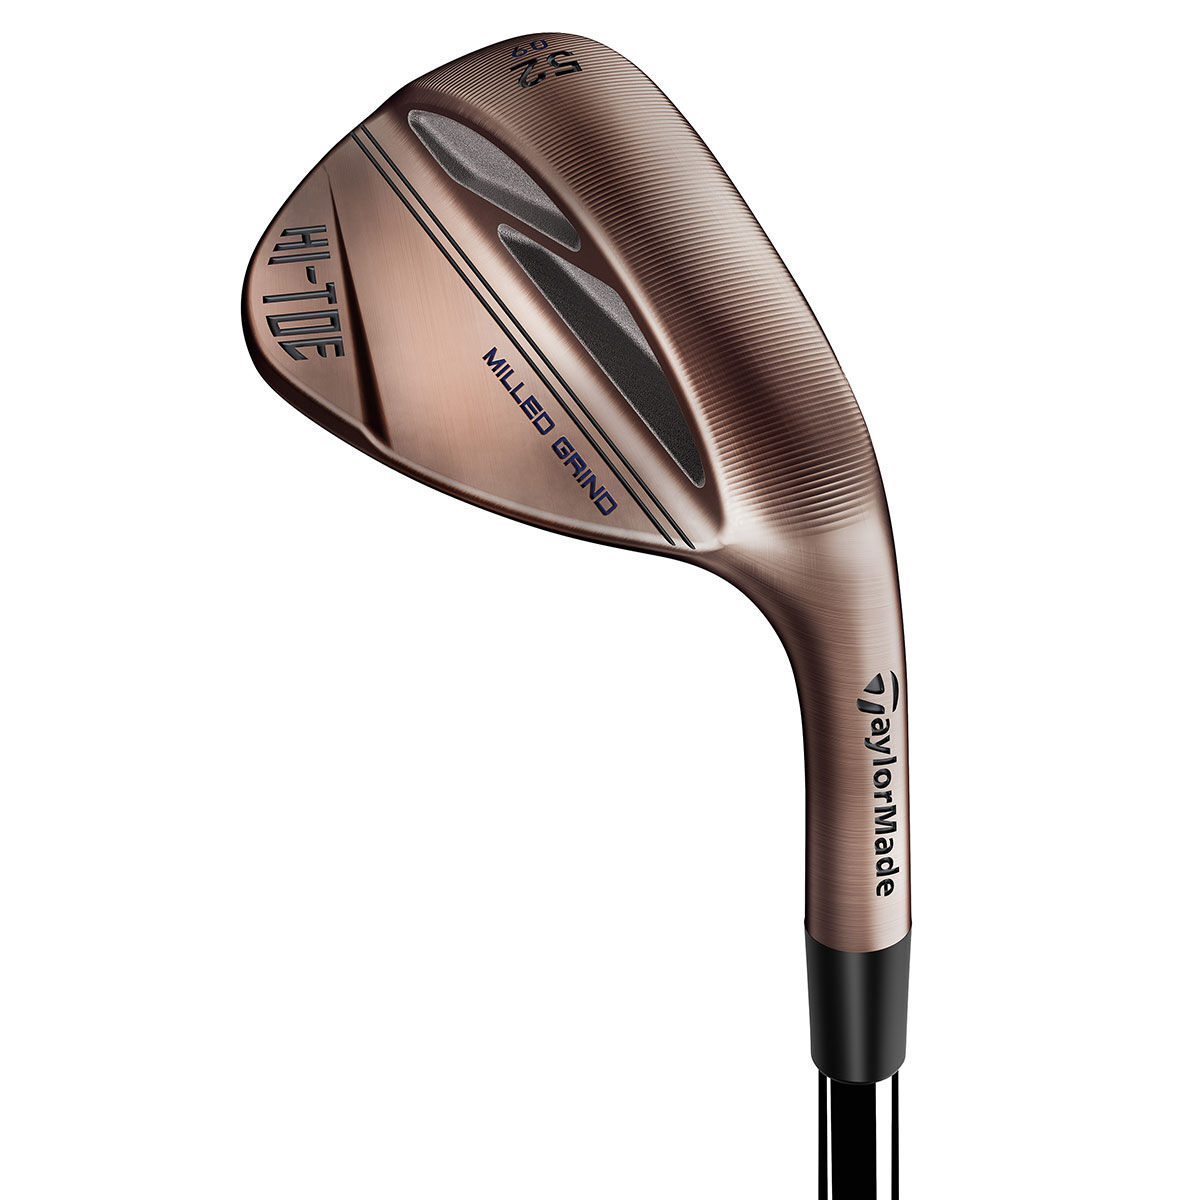 TaylorMade Brown Hi-Toe 3 Left Hand Golf Wedge, Size: 52° | American Golf von TaylorMade